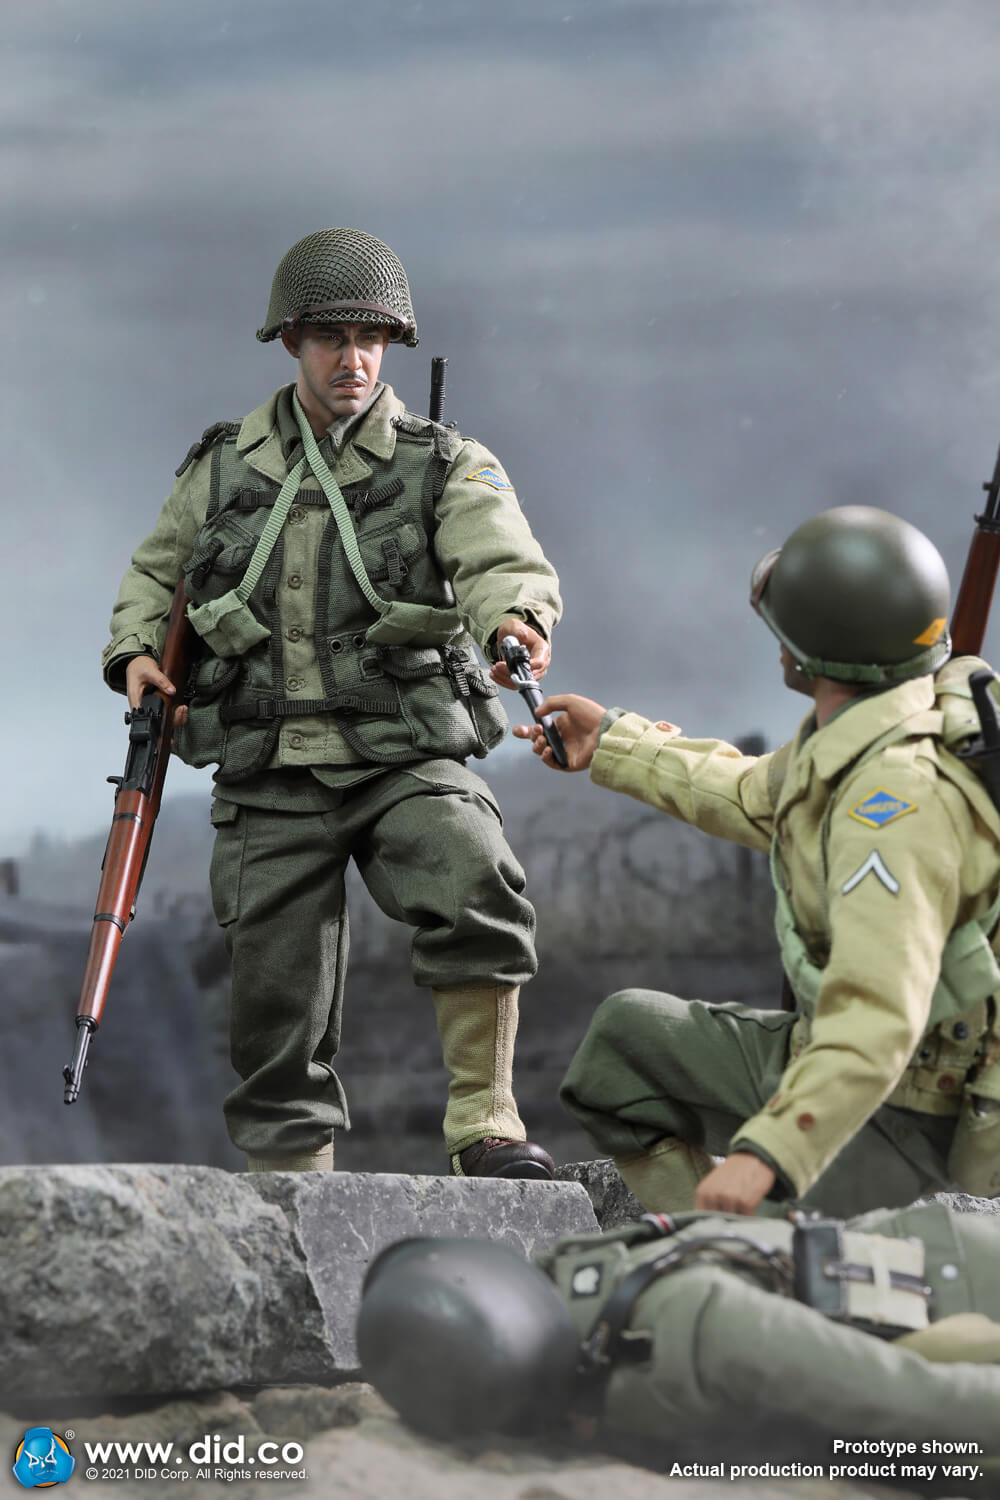 2nddRangerBattalion - NEW PRODUCT: DiD: A80155  WWII US 2nd Ranger Battalion Series 6 – Private Mellish 17276